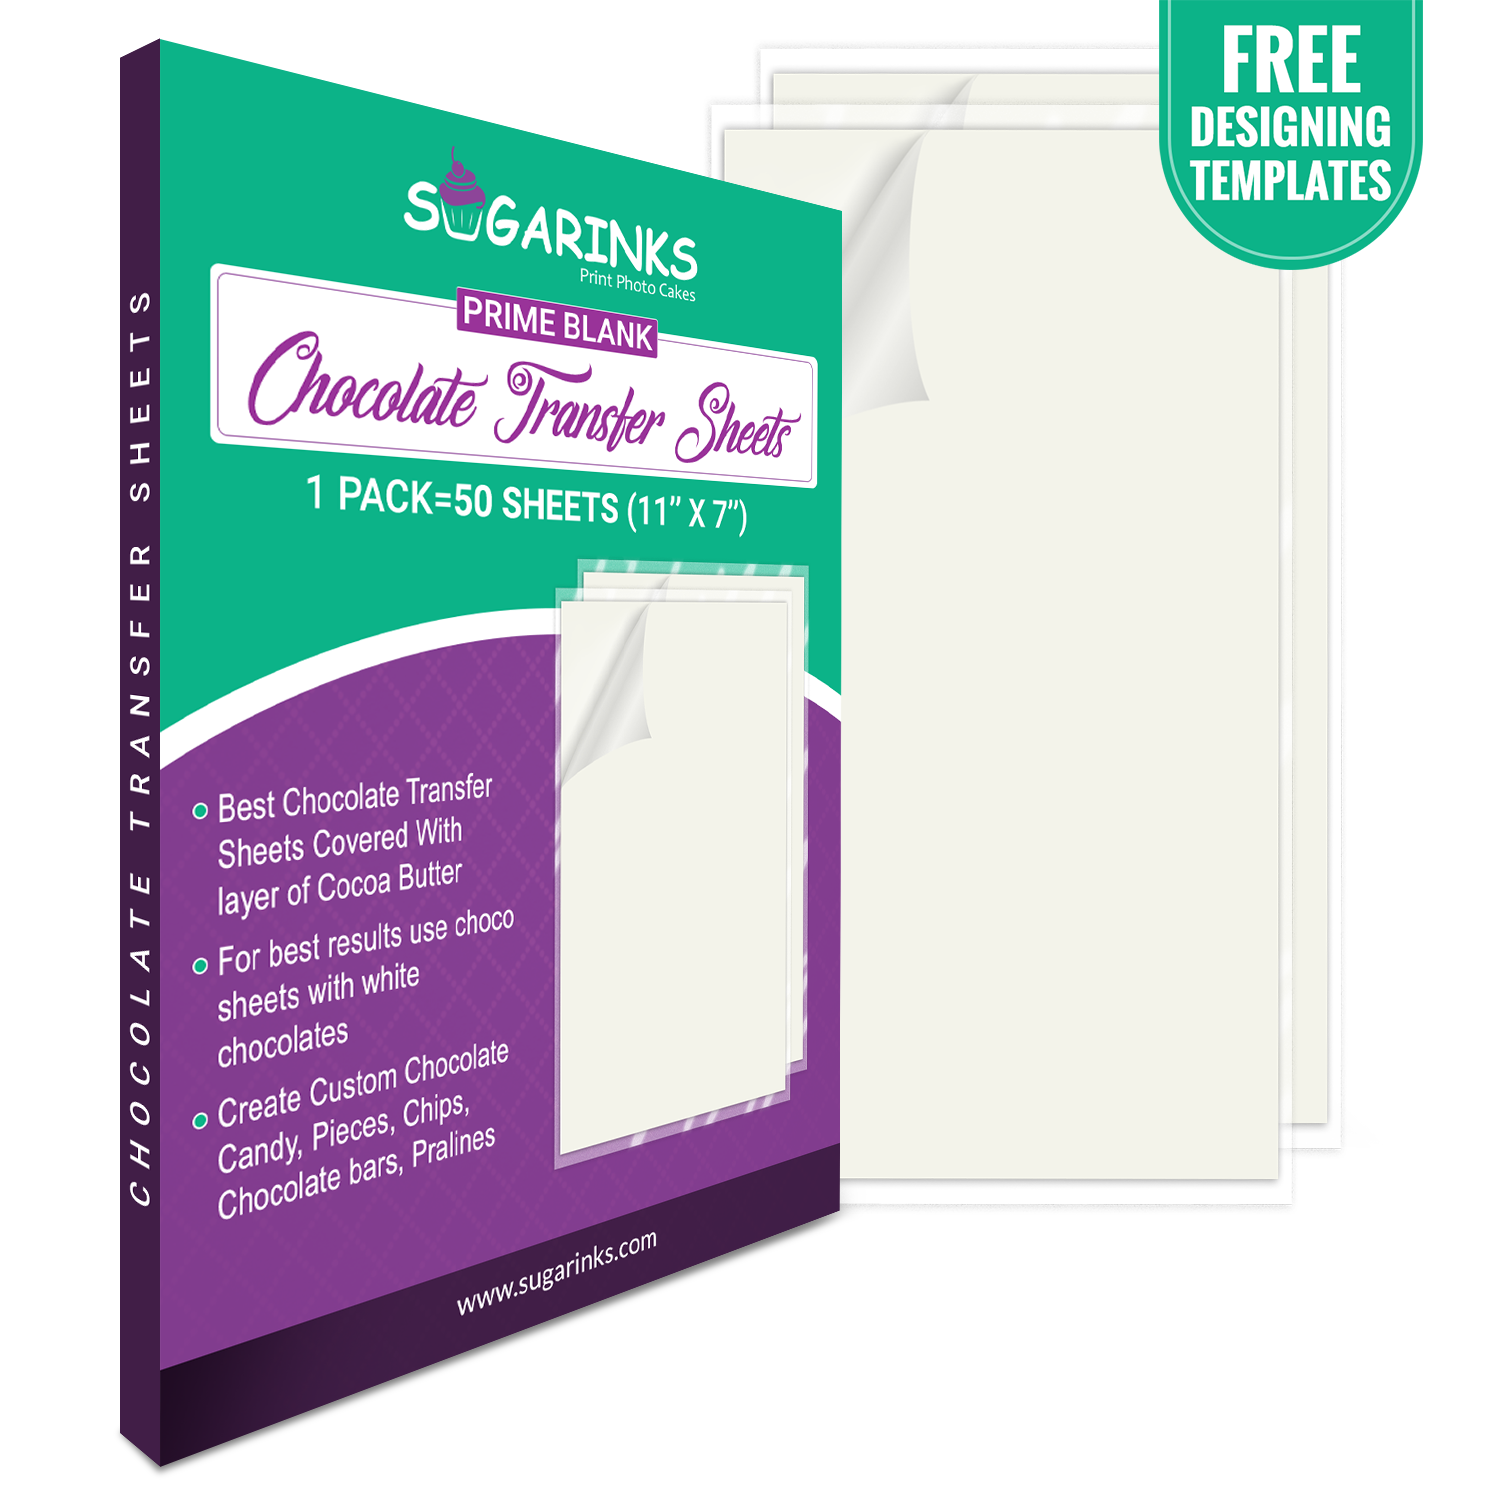 Sugarinks Prime Blank Chocolate Transfer Sheets A4 Size (11”X7”) – Pack of 50